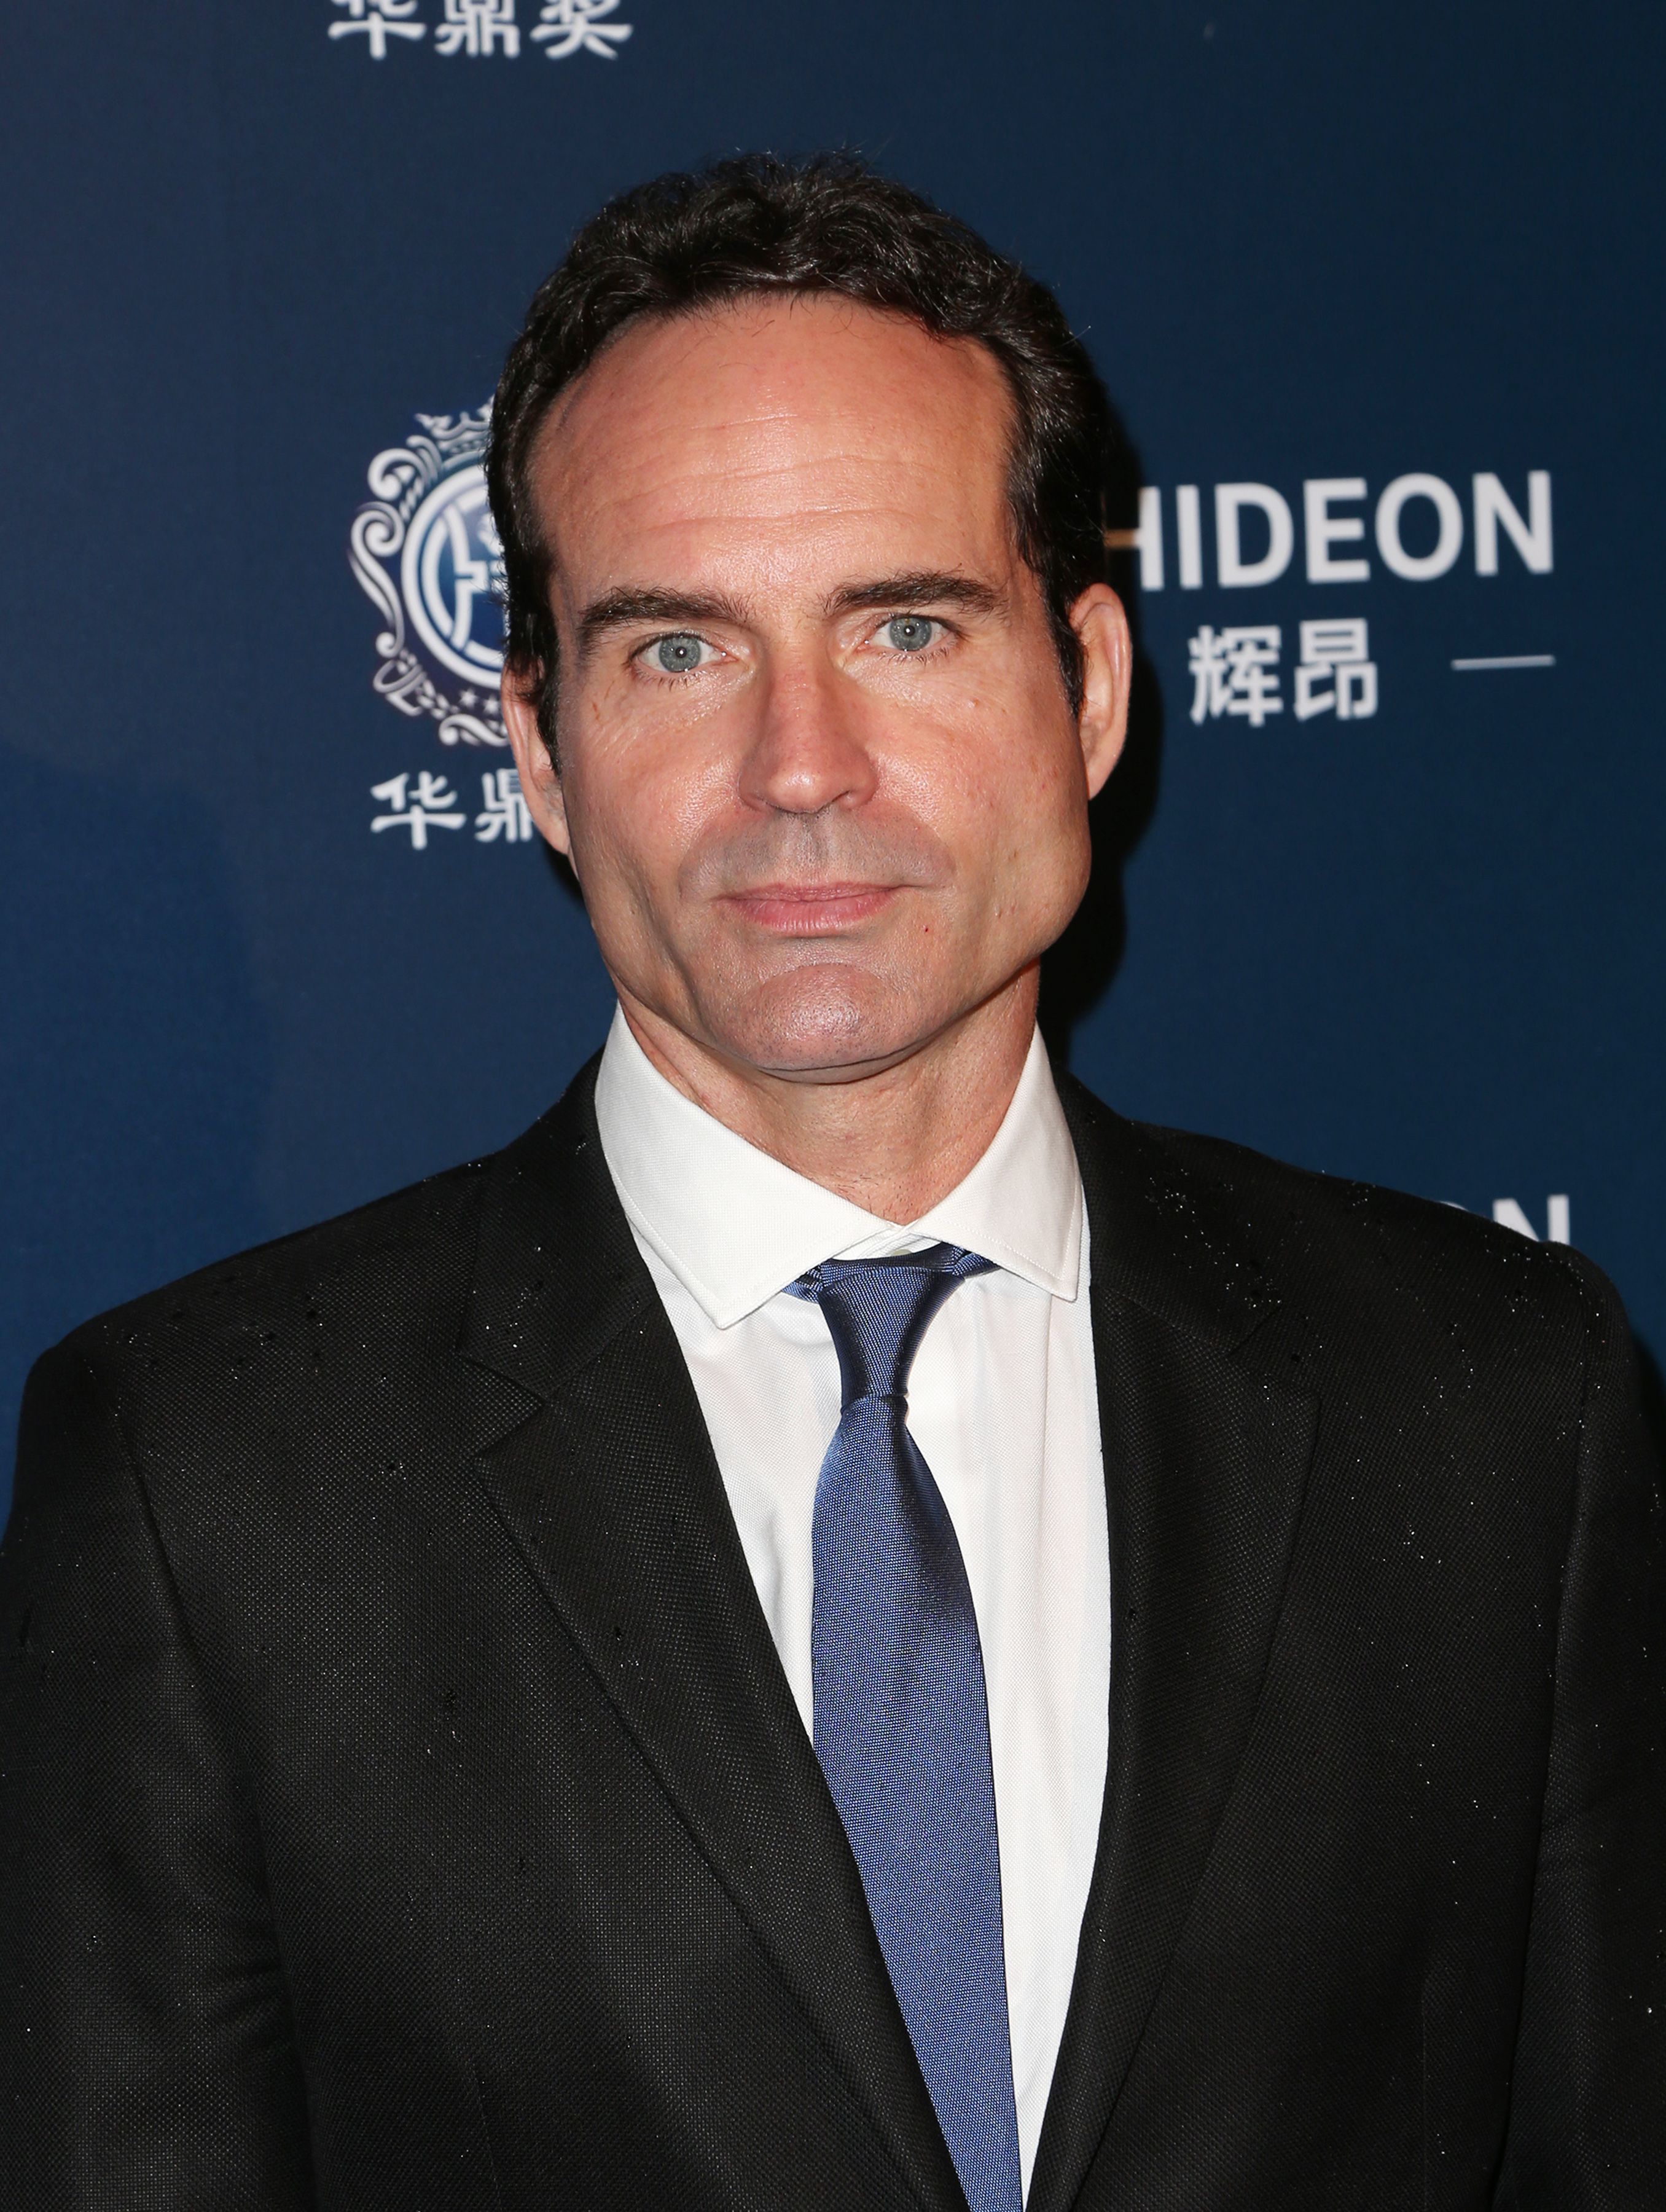 How tall is Jason Patric?